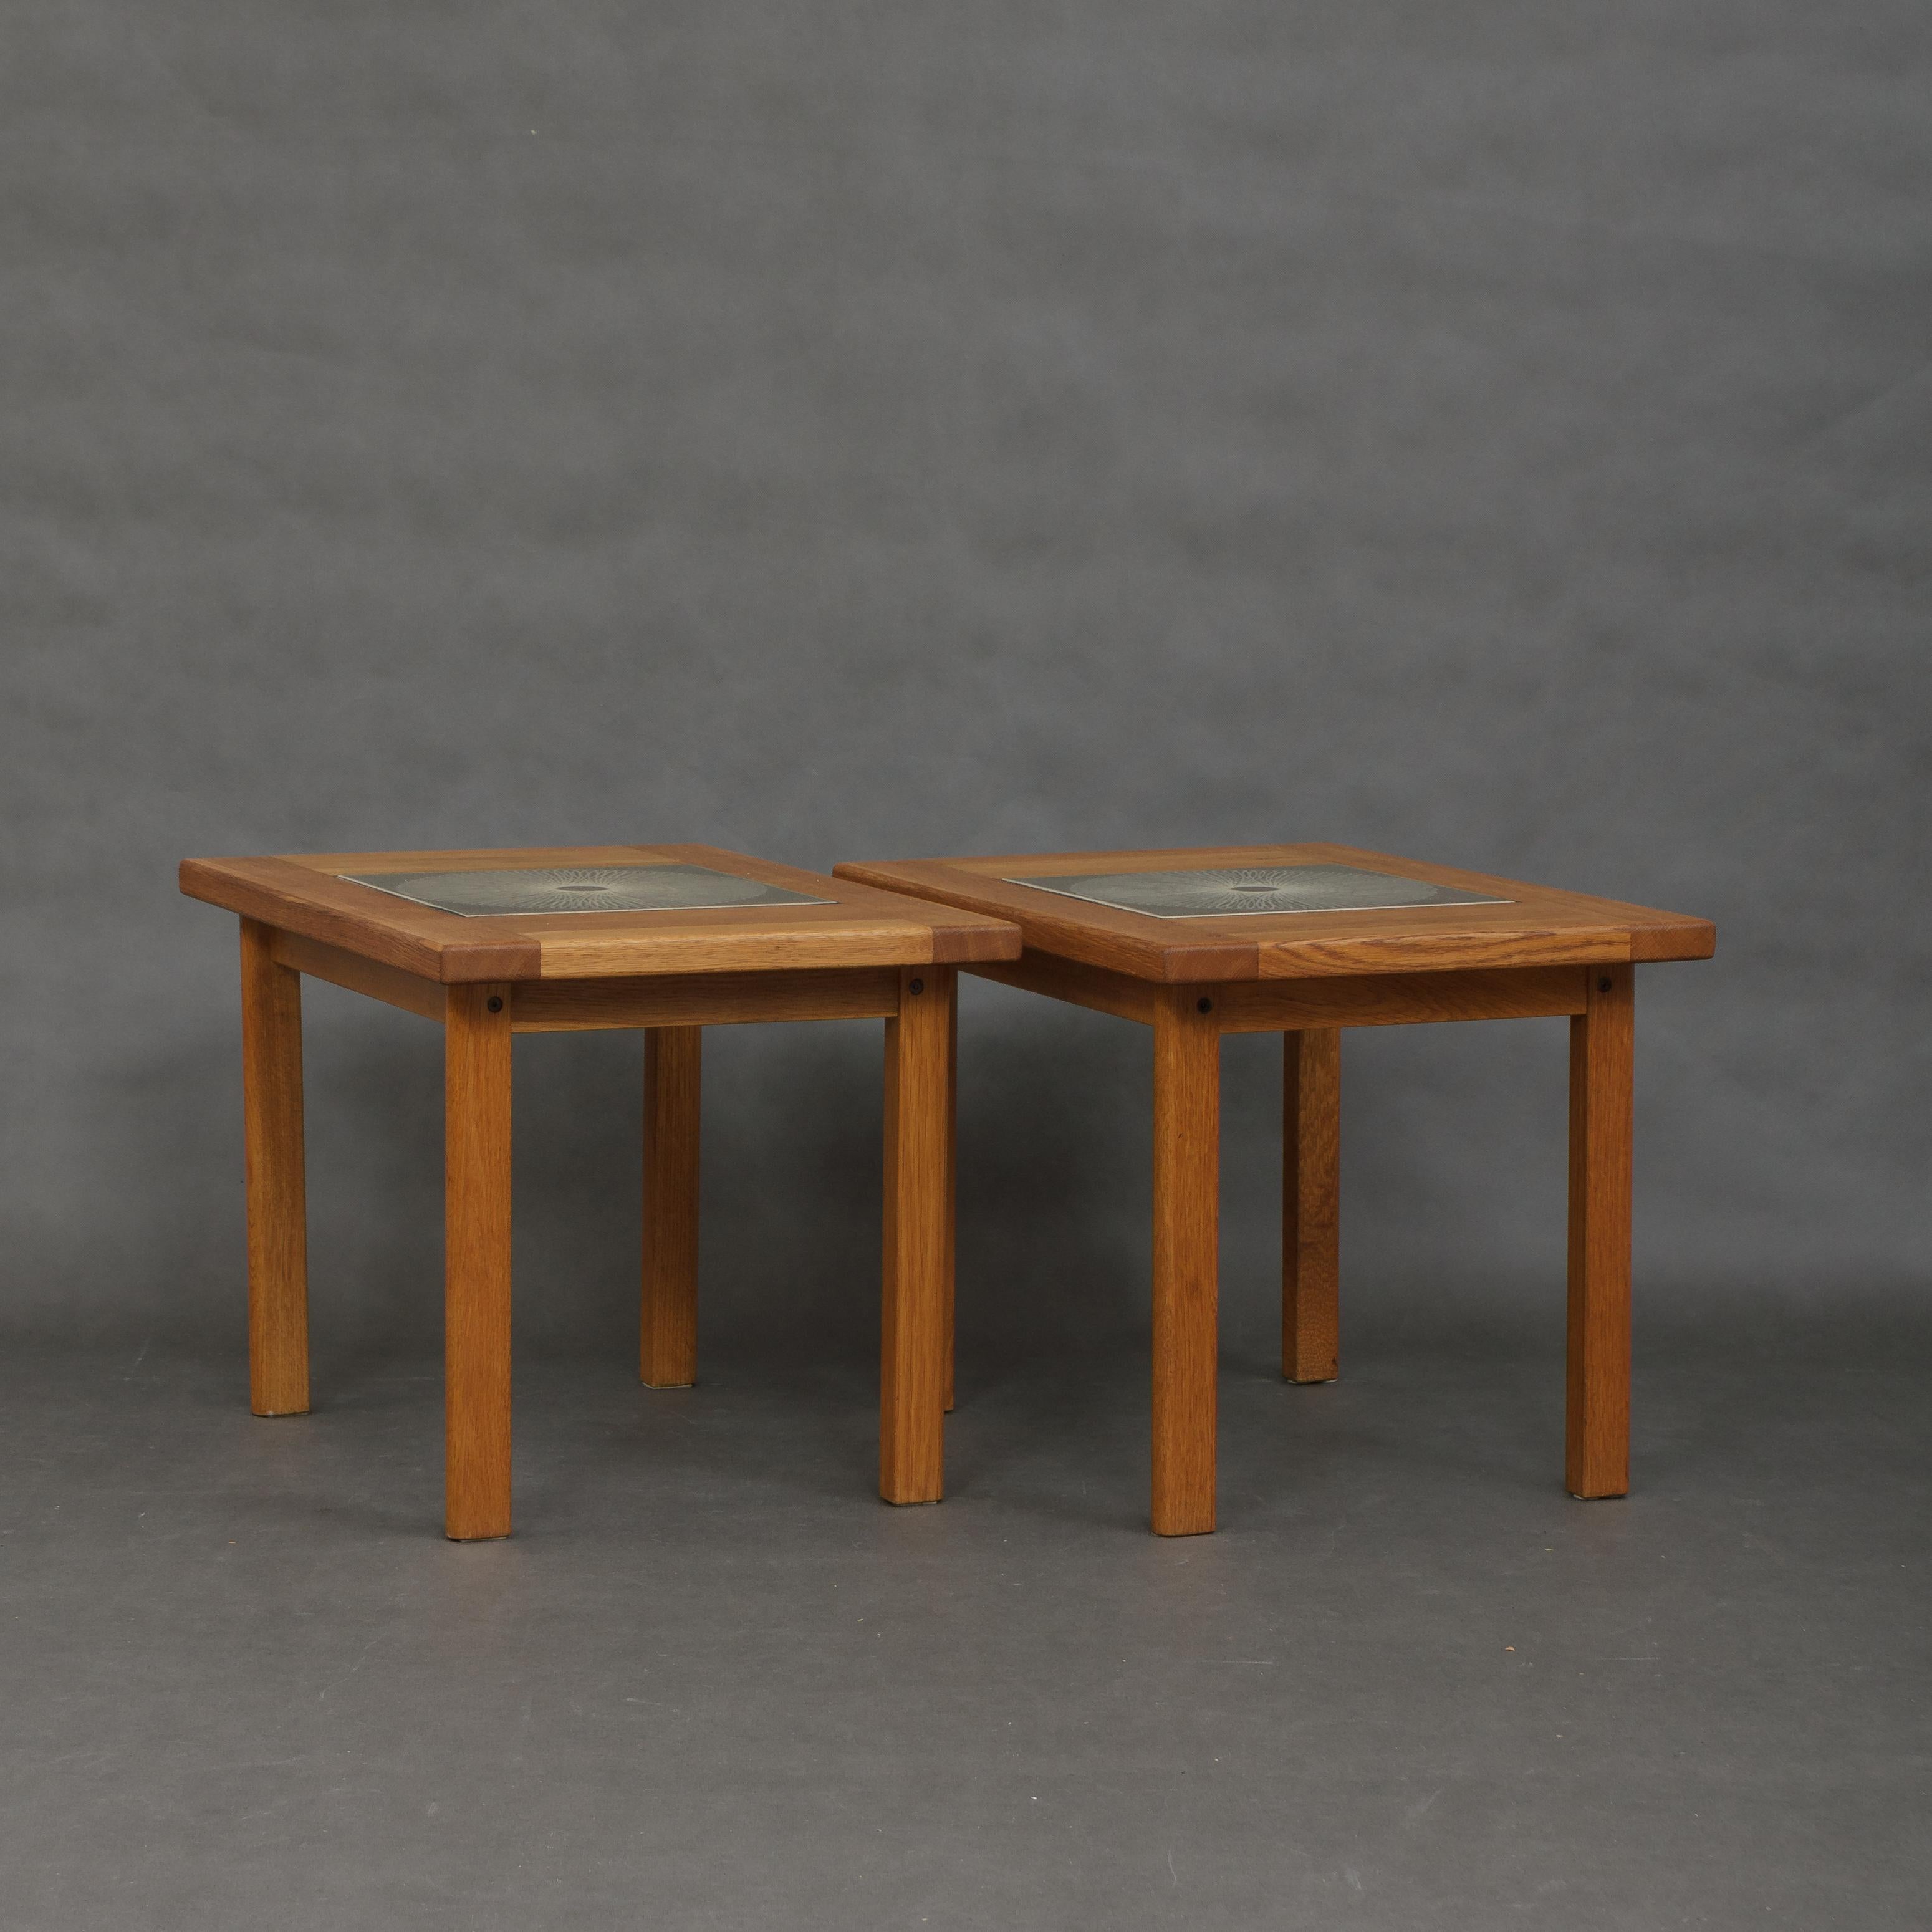 French Pair of Midcentury Oak Side Tables Attributed to Tue Poulsen For Sale